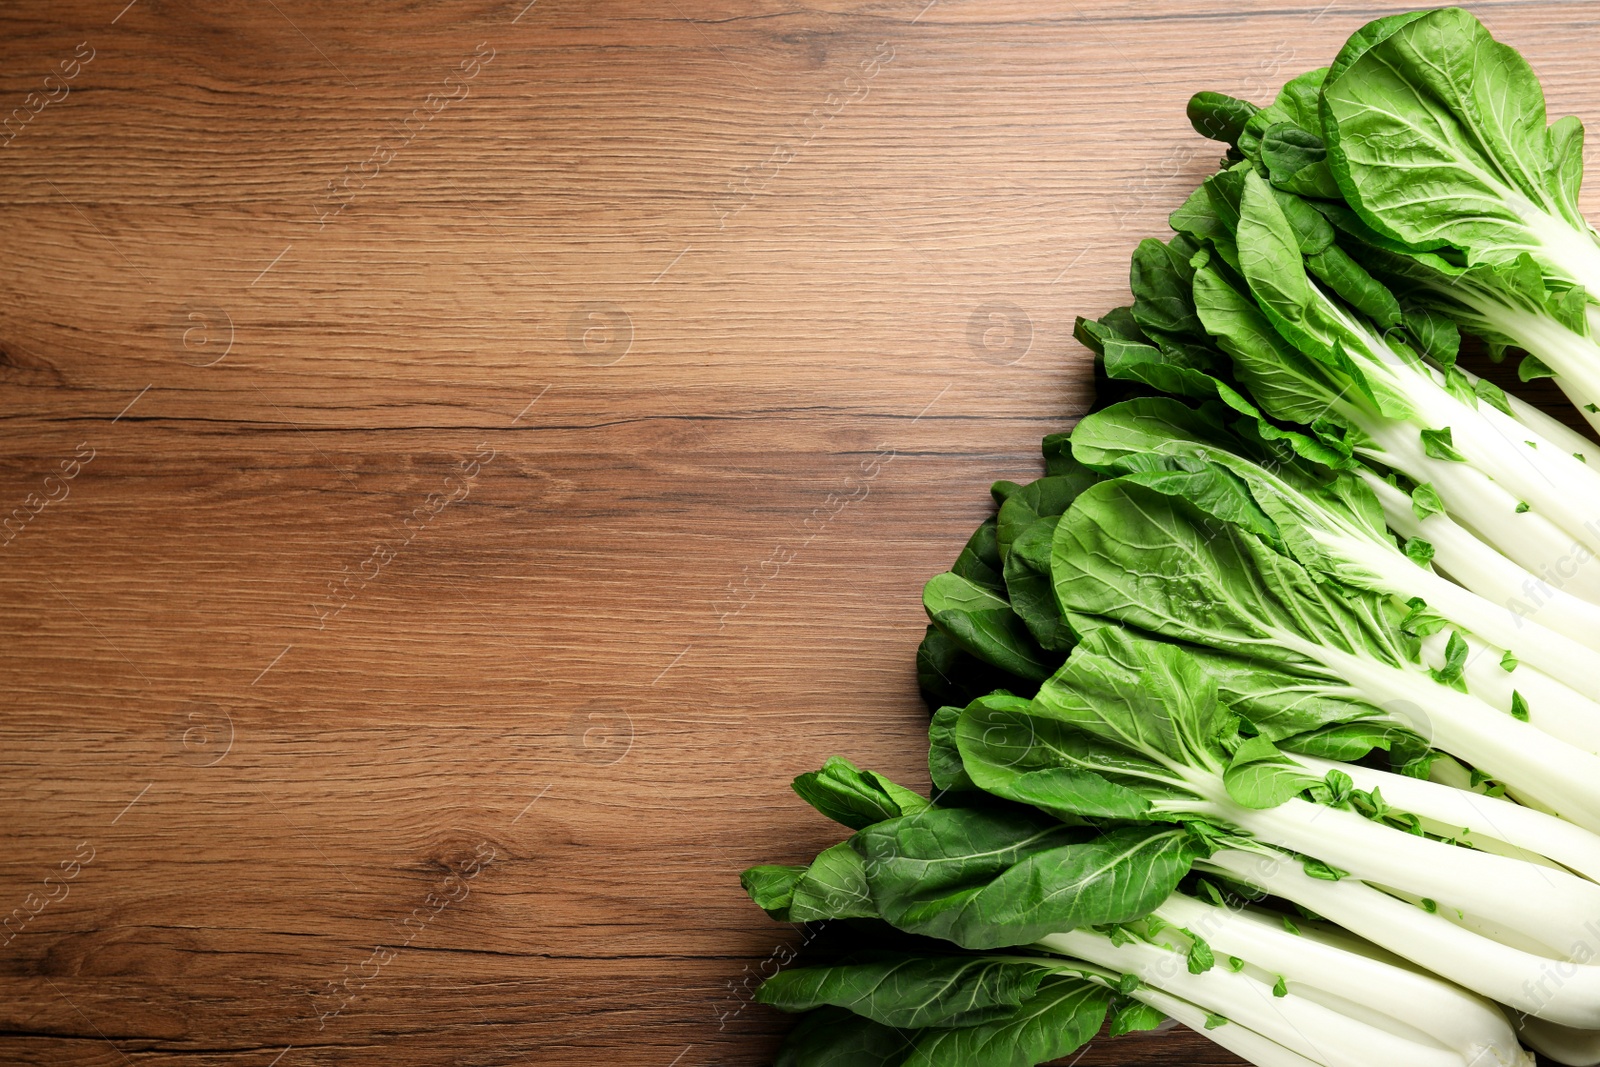 Photo of Fresh green pak choy cabbages on wooden table, flat lay. Space for text